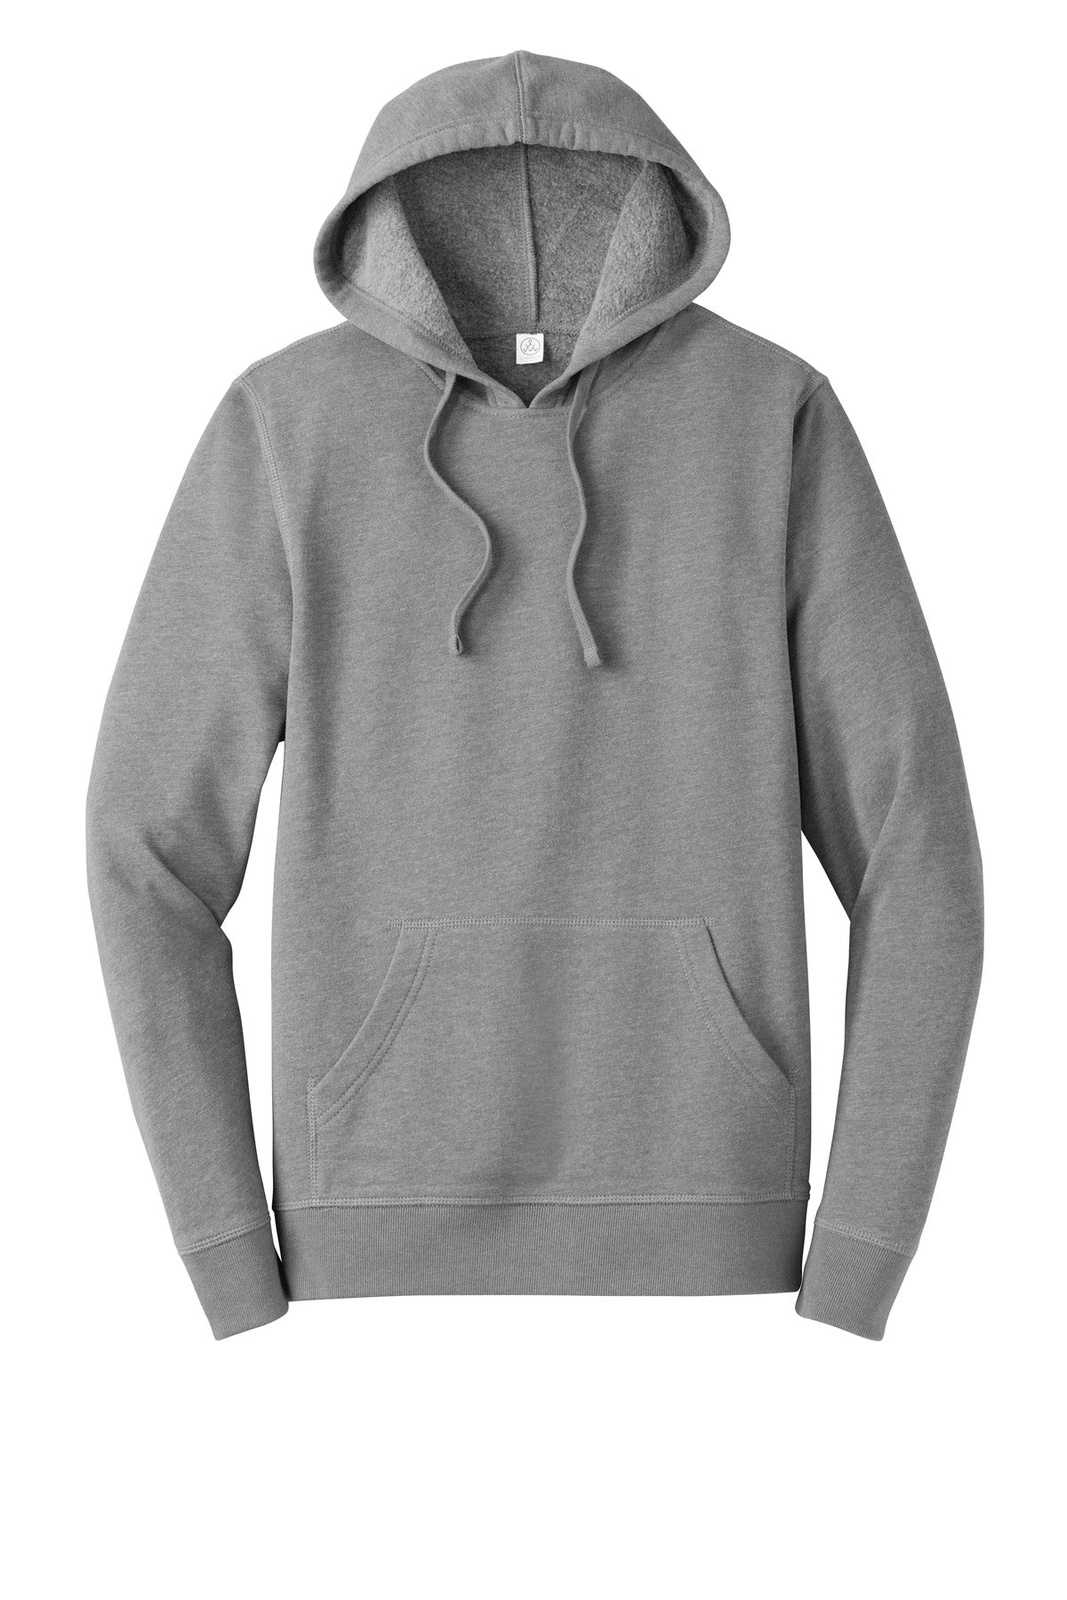 Alternative AA8051 Rider Blended Fleece Pullover Hoodie - Heather Gray - HIT a Double - 5